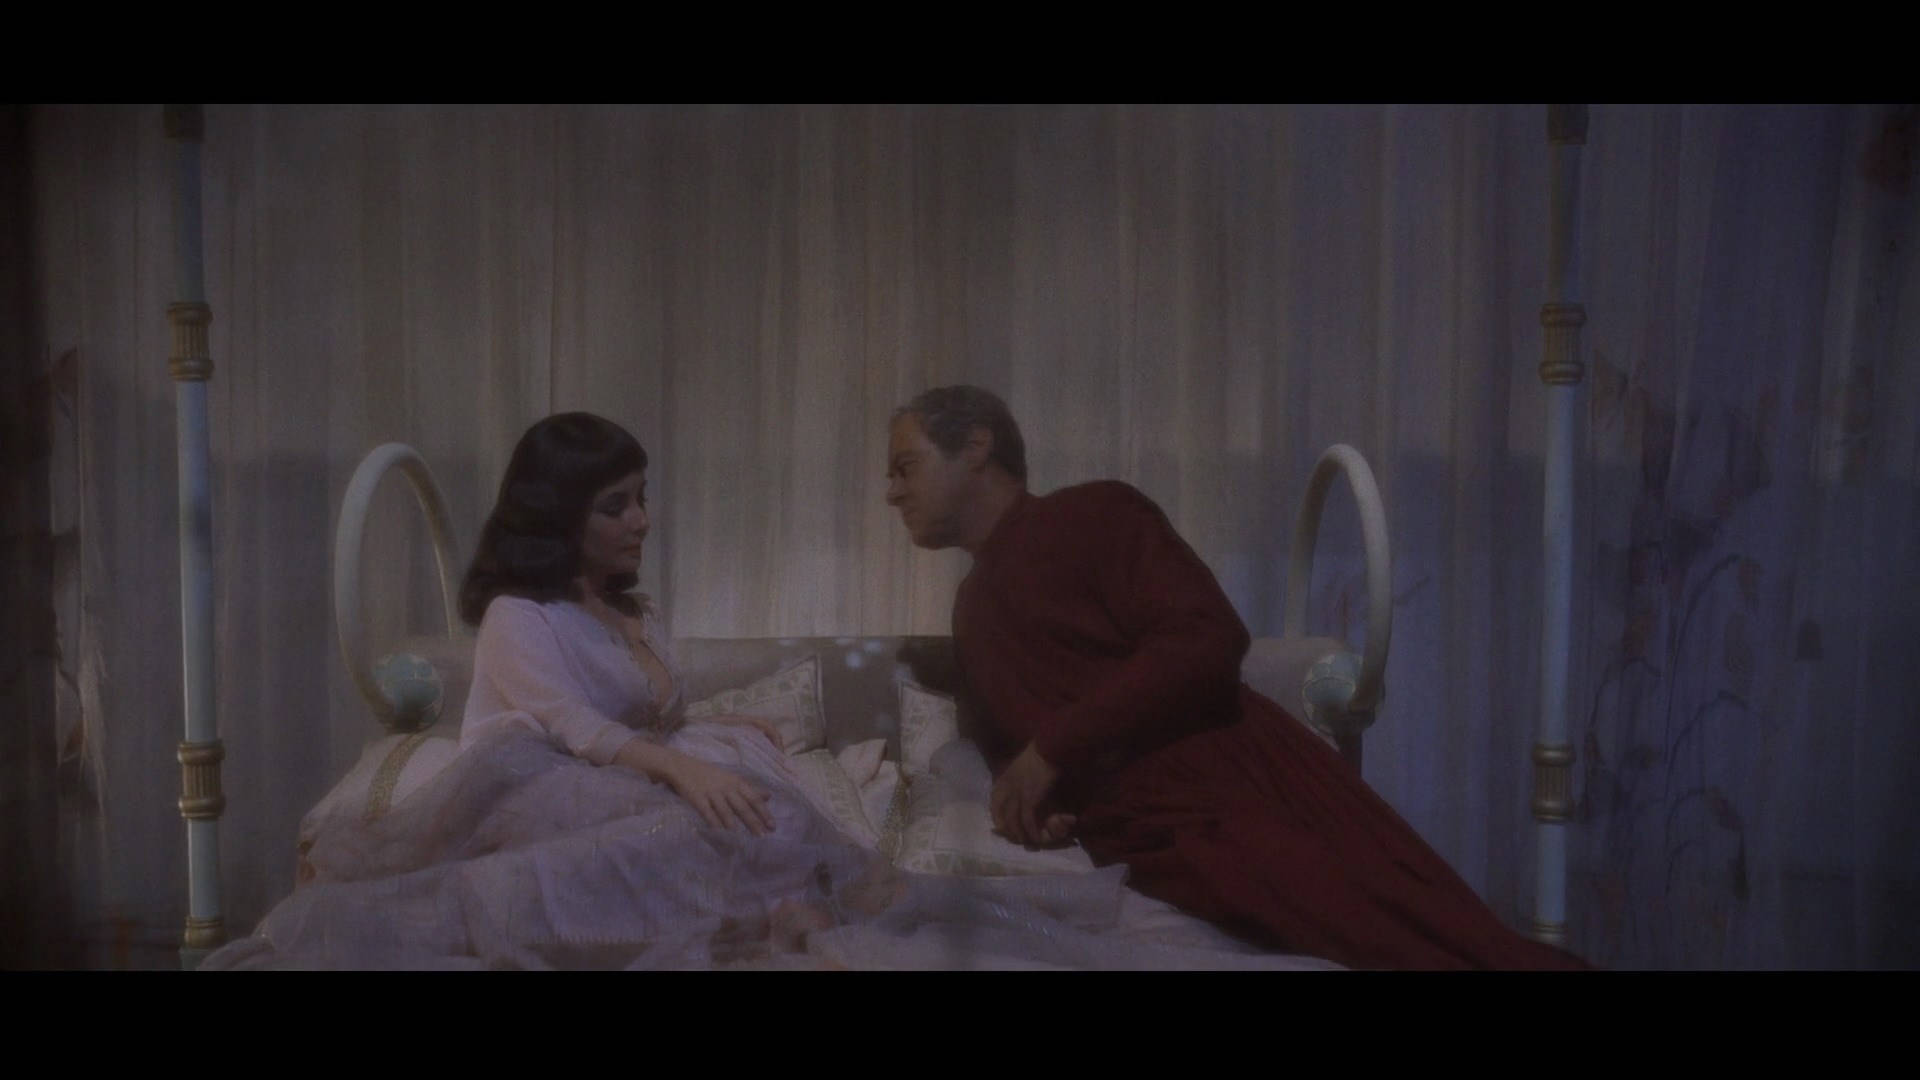 Rexharrison Och Elizabeth Taylor. (it's The Same In Swedish, As The Names Are Not Translated) Wallpaper